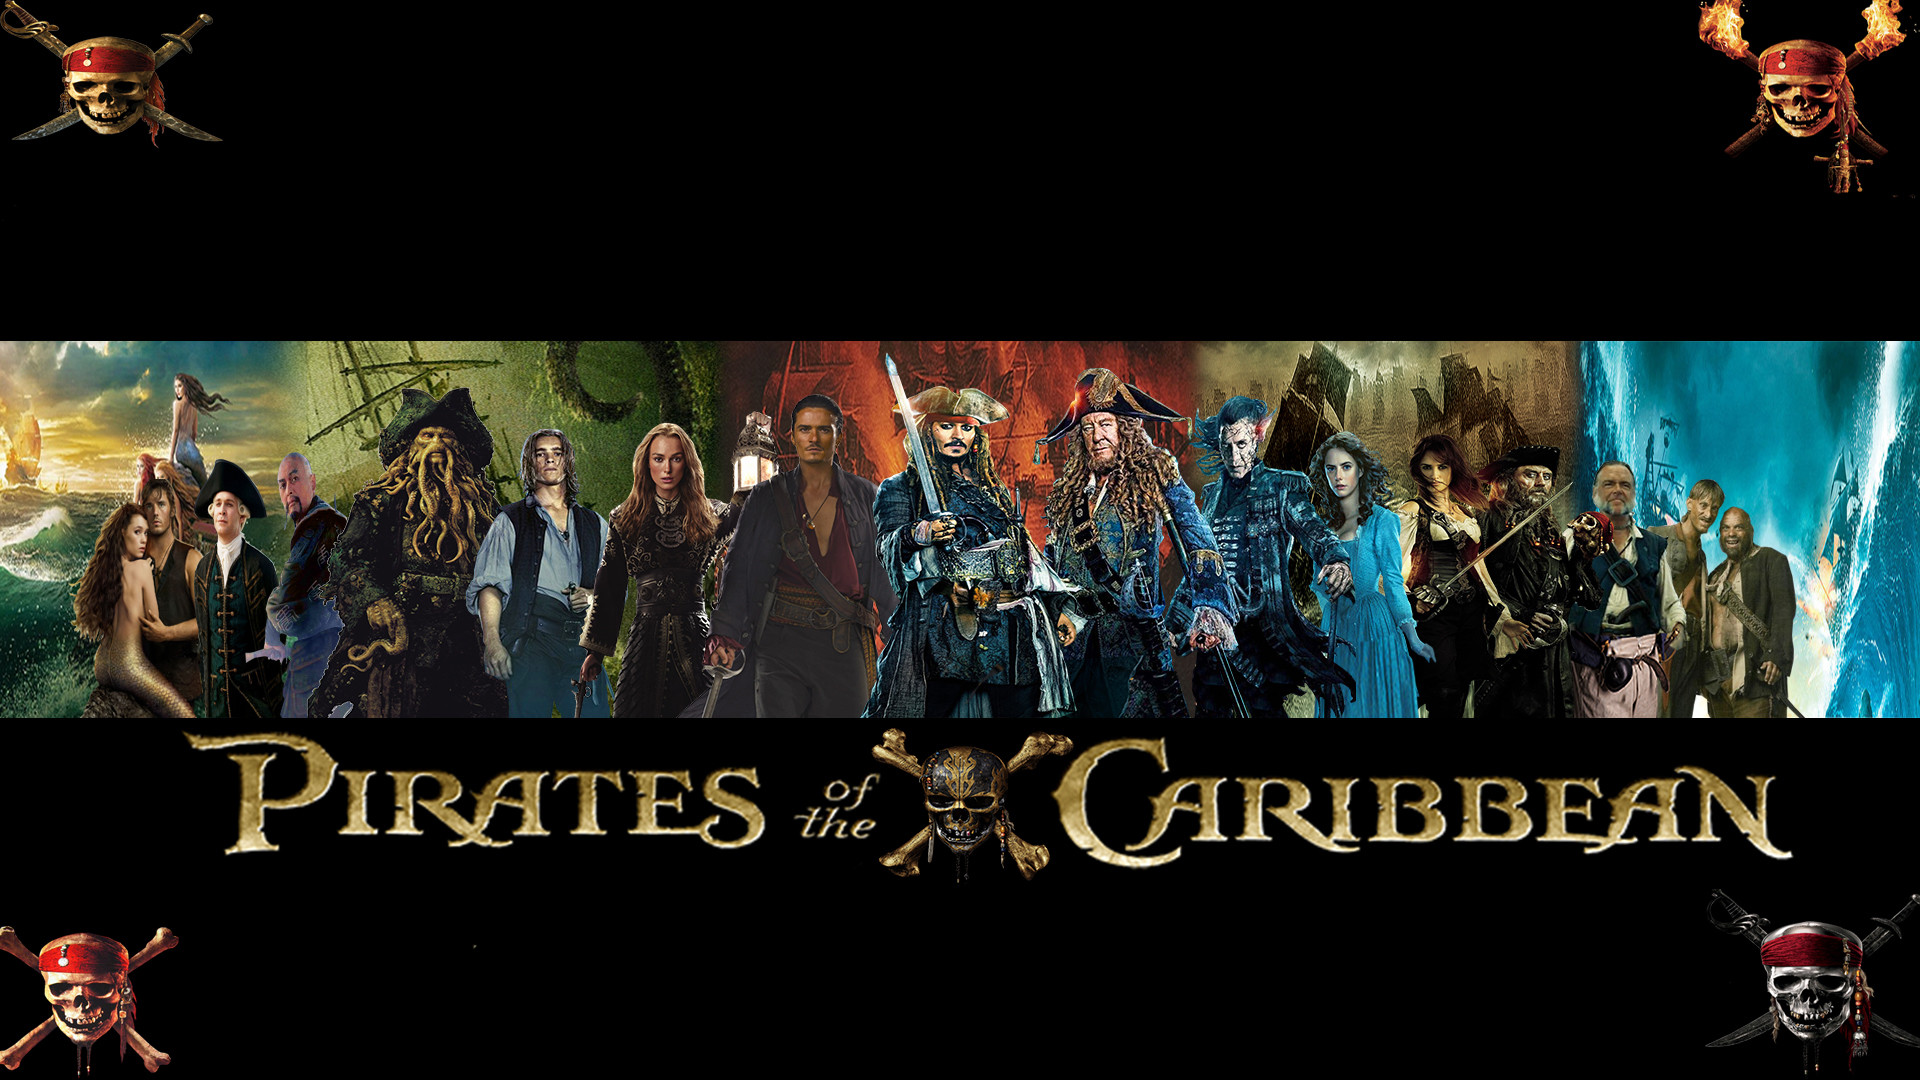 Pirates Of The Caribbean Images The Black Pearl Hd - Pirates Of The Caribbean Box Set 1 5 , HD Wallpaper & Backgrounds